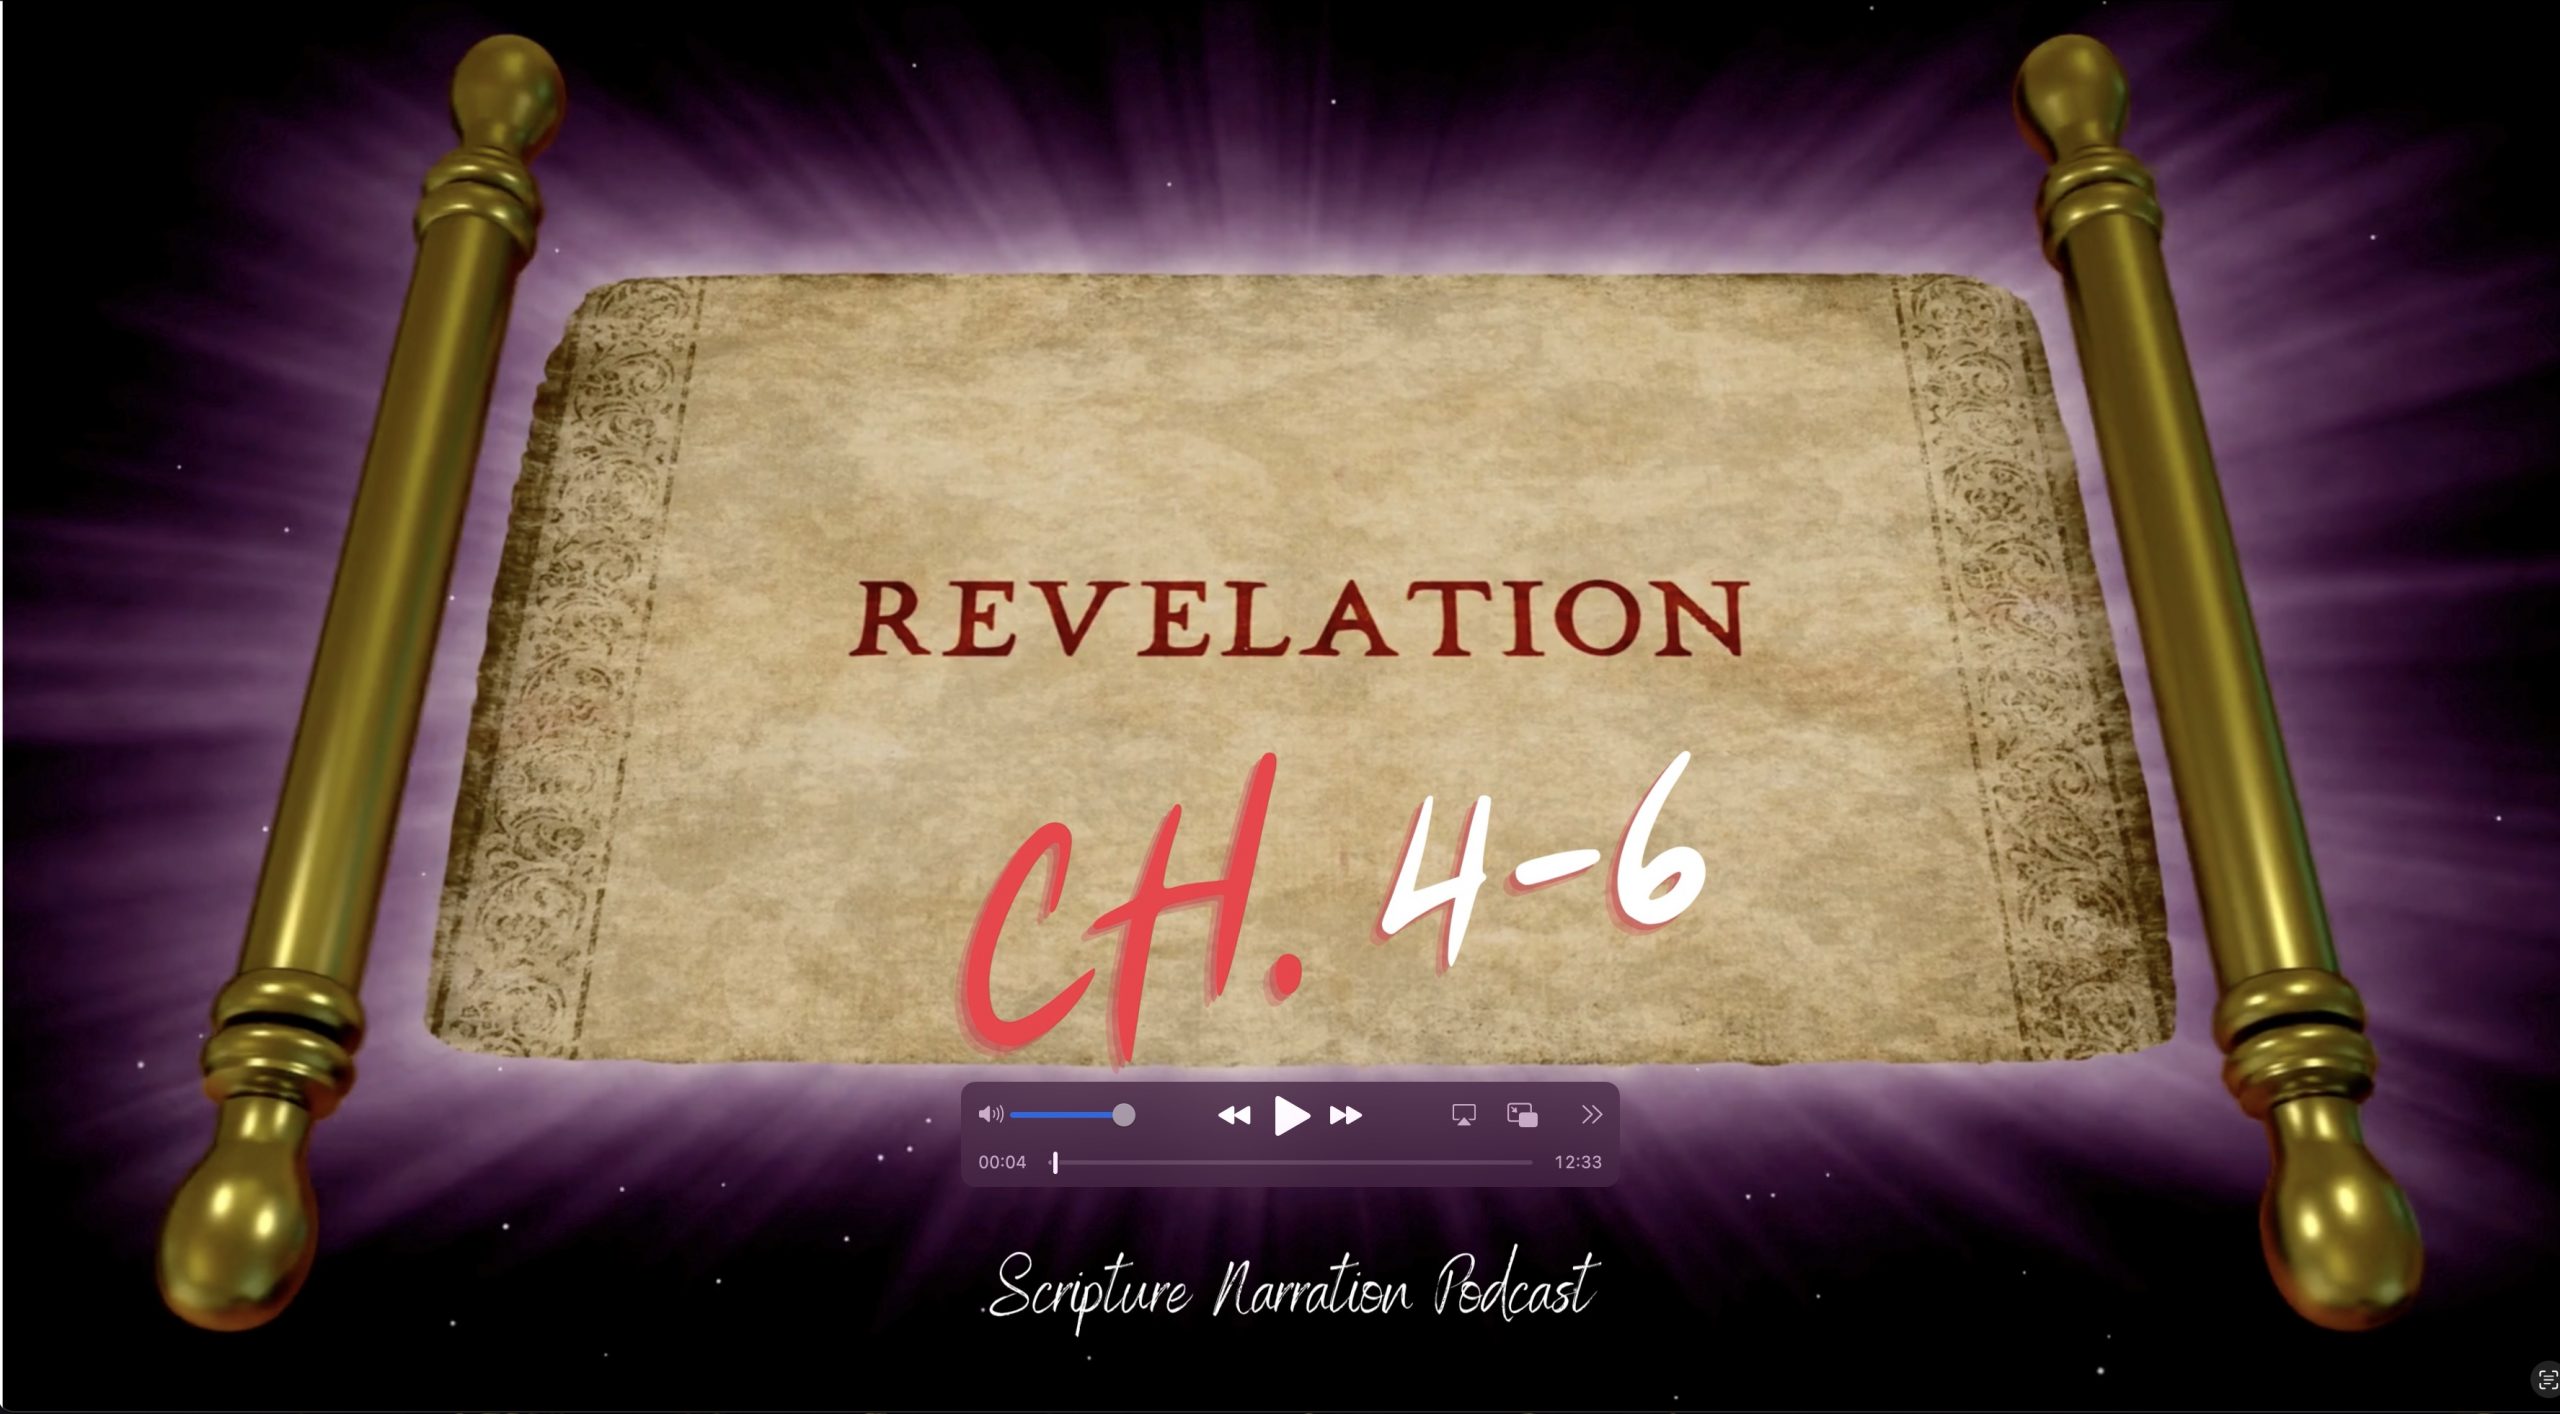 #45 - REVELATION (HAZON) Chapters: 4-6 Season 3 - Judgement Comes  Excerpts from the scriptures. All Praises to 𐤉𐤄𐤅𐤄 our Elohiym!